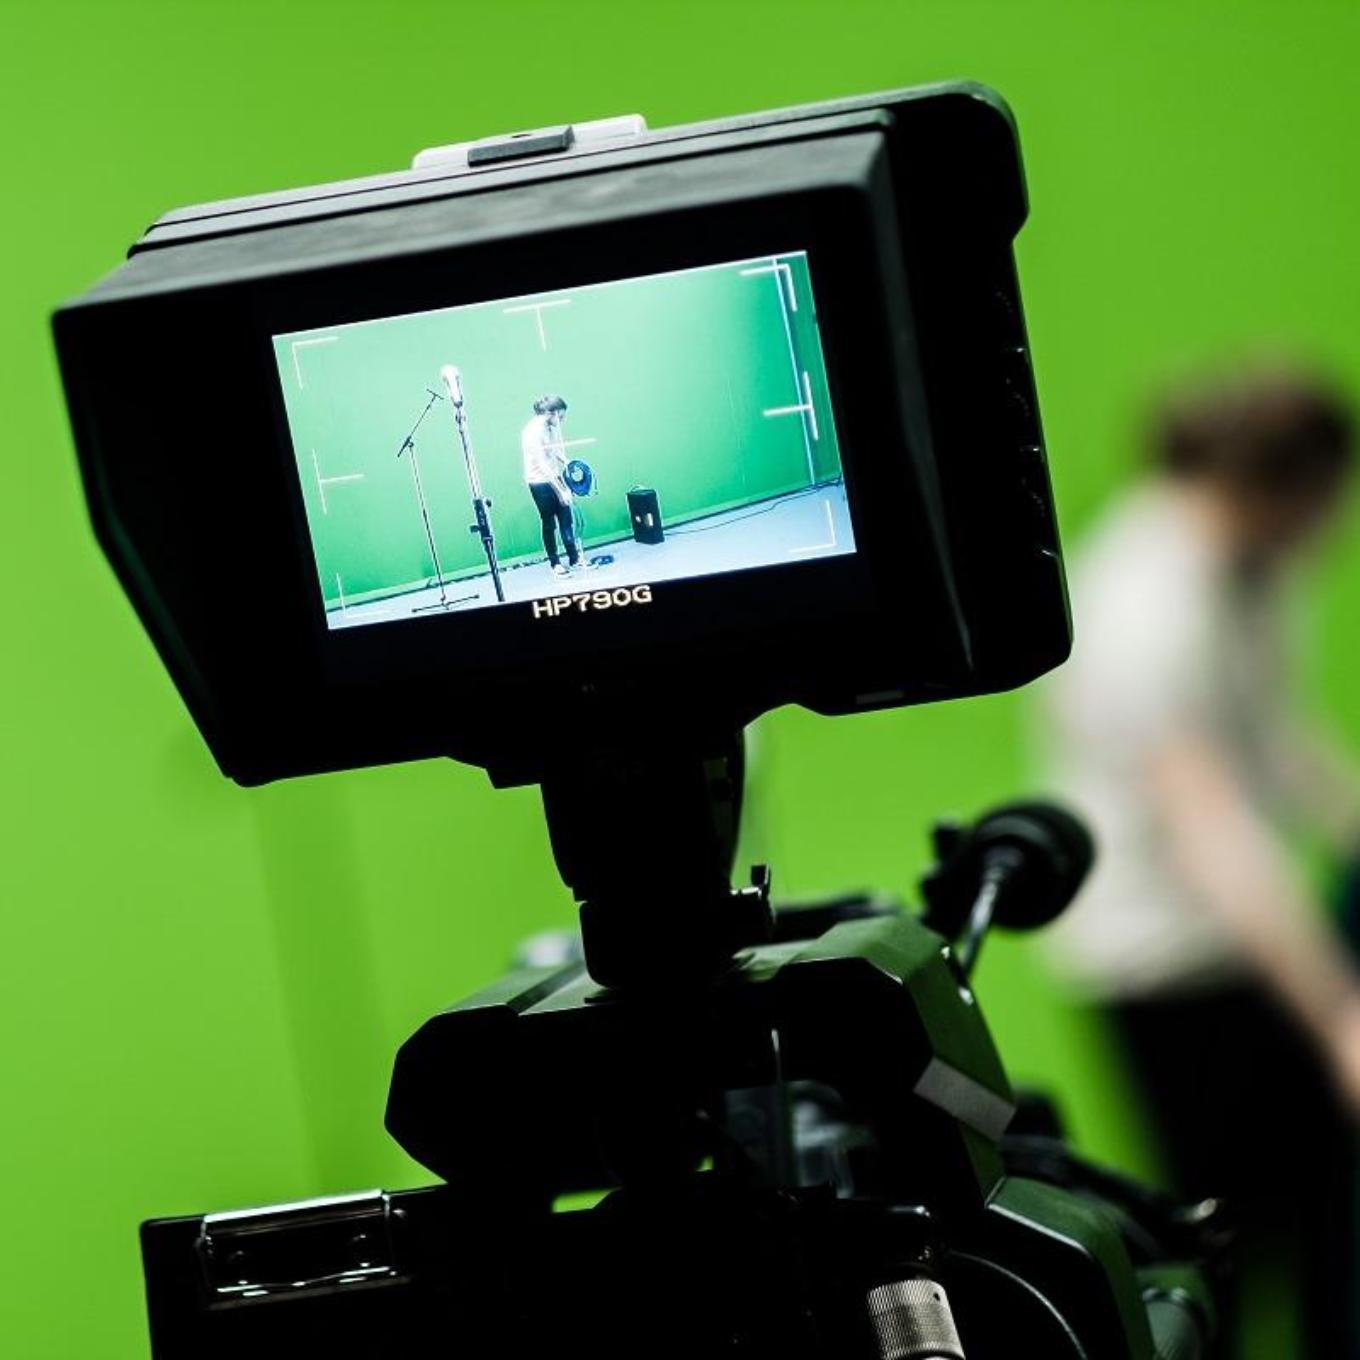 Camera in front of green screen